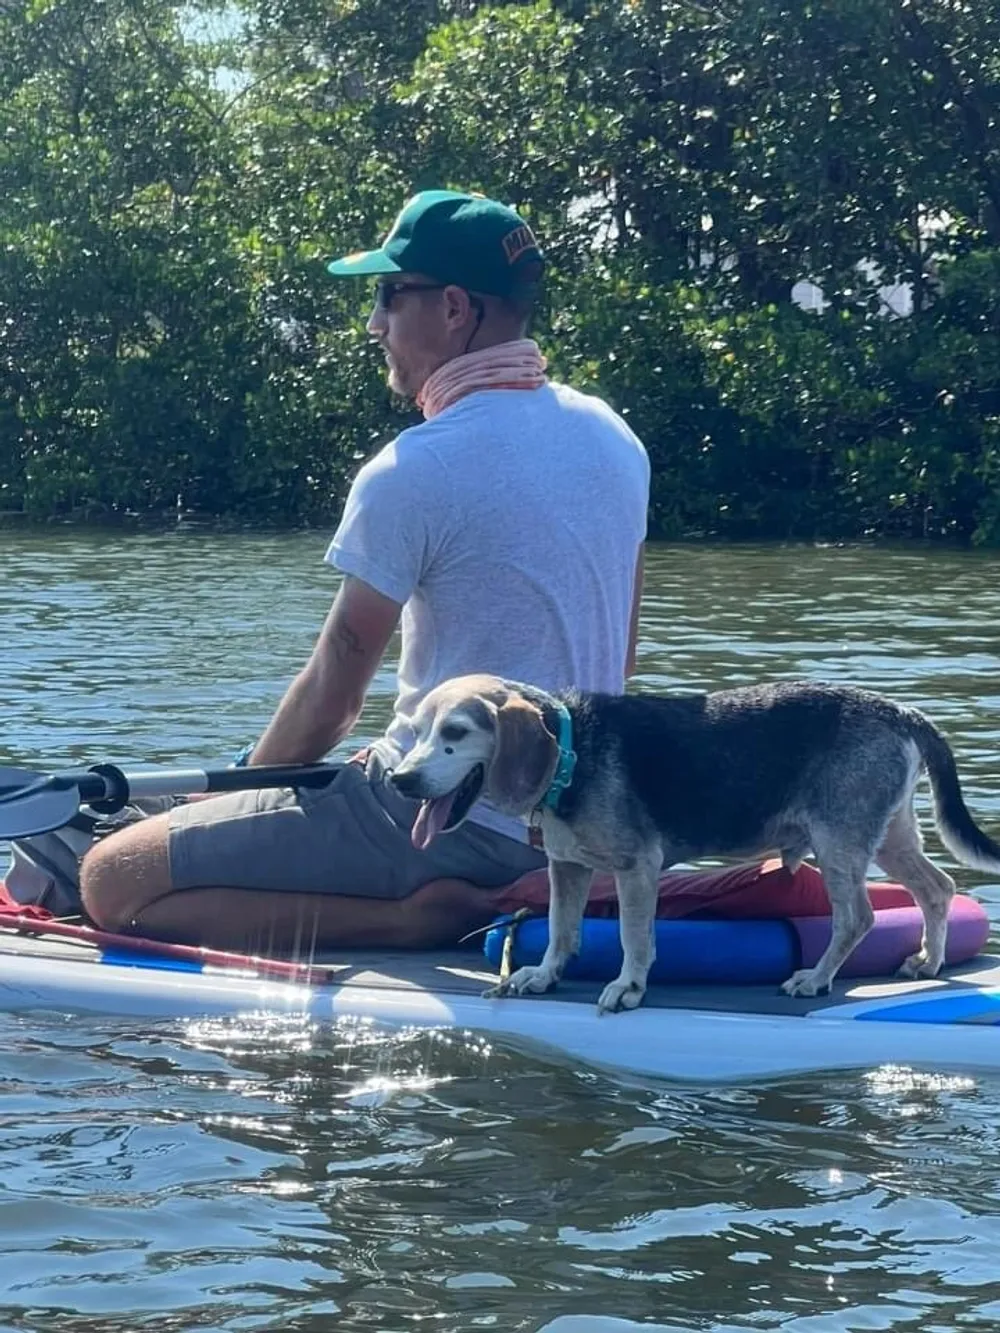 A man and his dog are enjoying a peaceful paddleboarding session on a calm water body surrounded by greenery